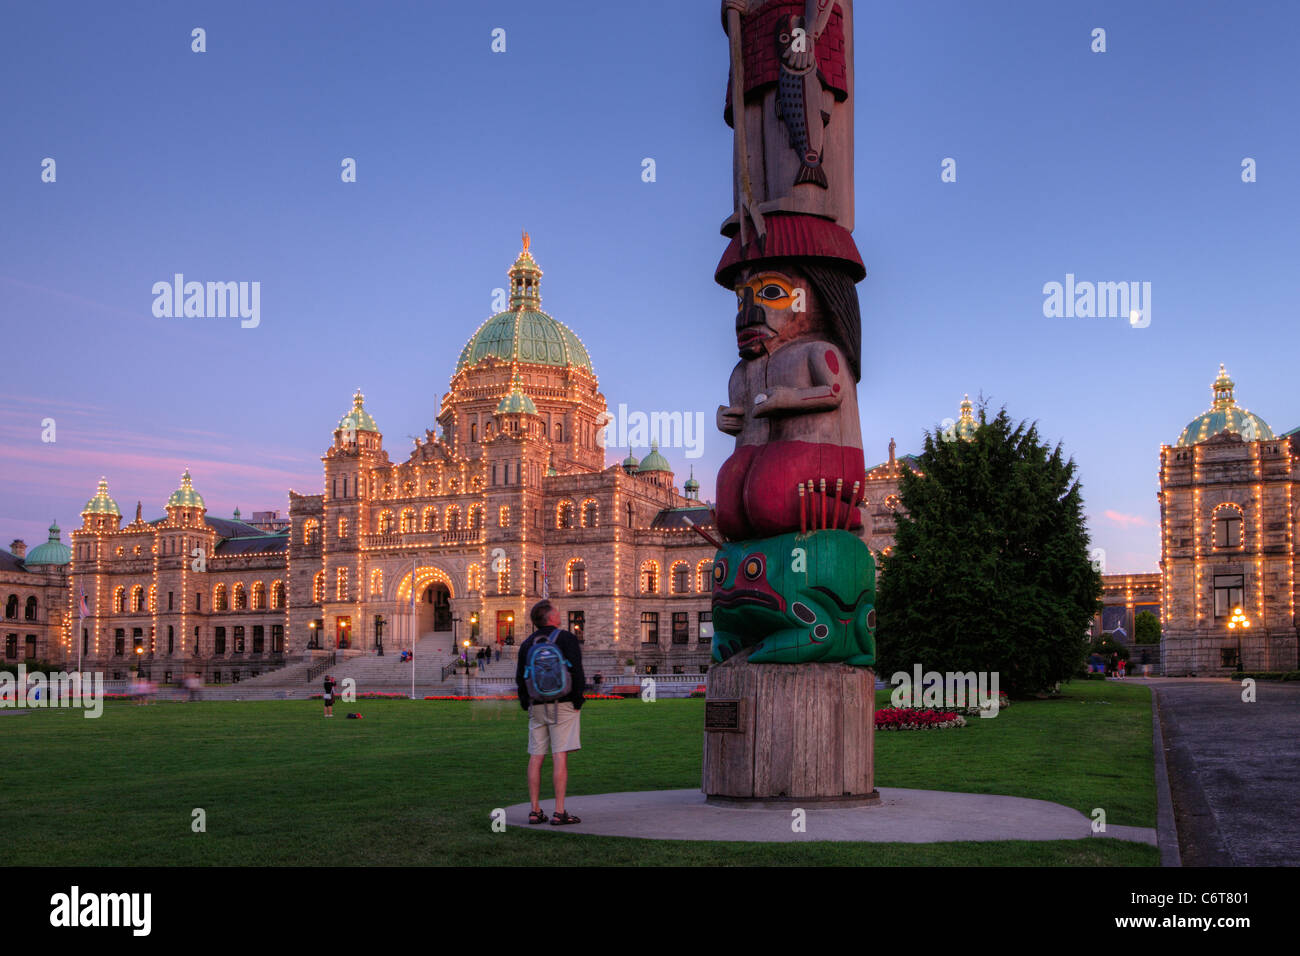 Aboriginal first nations Knowledge totem pole and Provincial legislative buildings at dusk-Victoria, British Columbia, Canada. Stock Photo